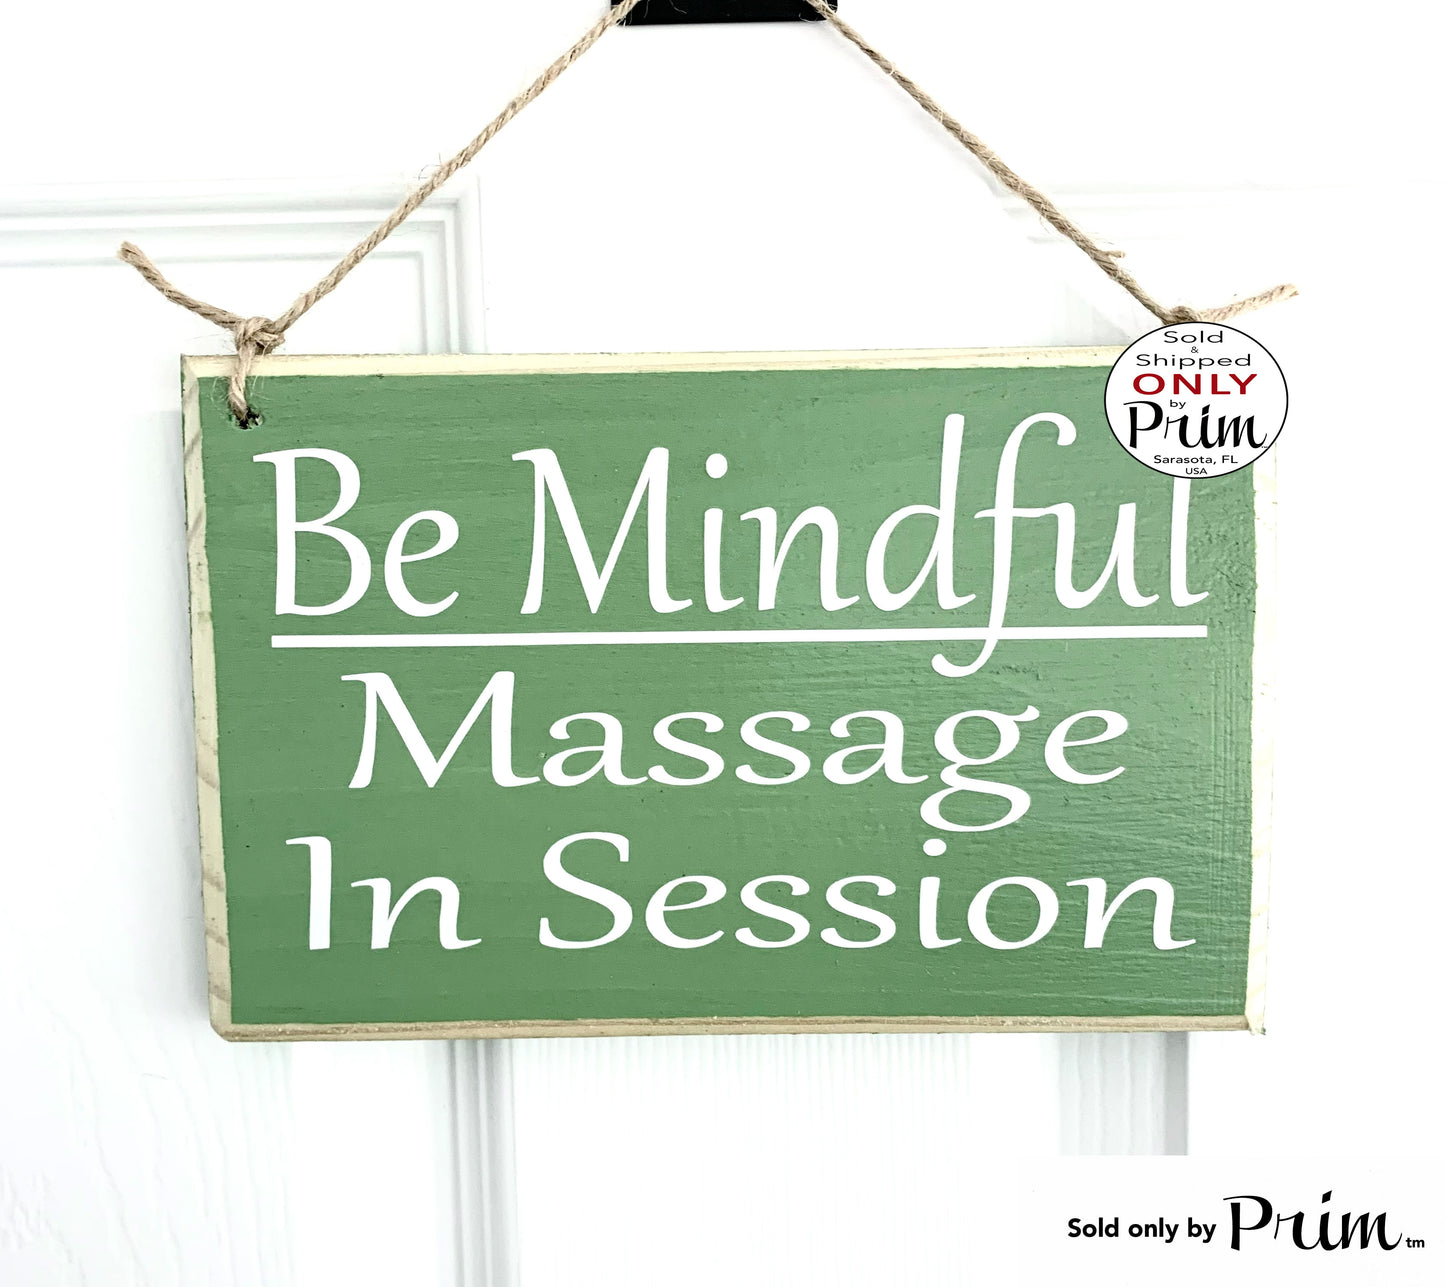 Designs by Prim 8x6 Be Mindful Massage in Session Custom Wood Sign | Therapy Spa Room Relaxation Service Progress Room Name Med Spa Massage Room Door Plaque